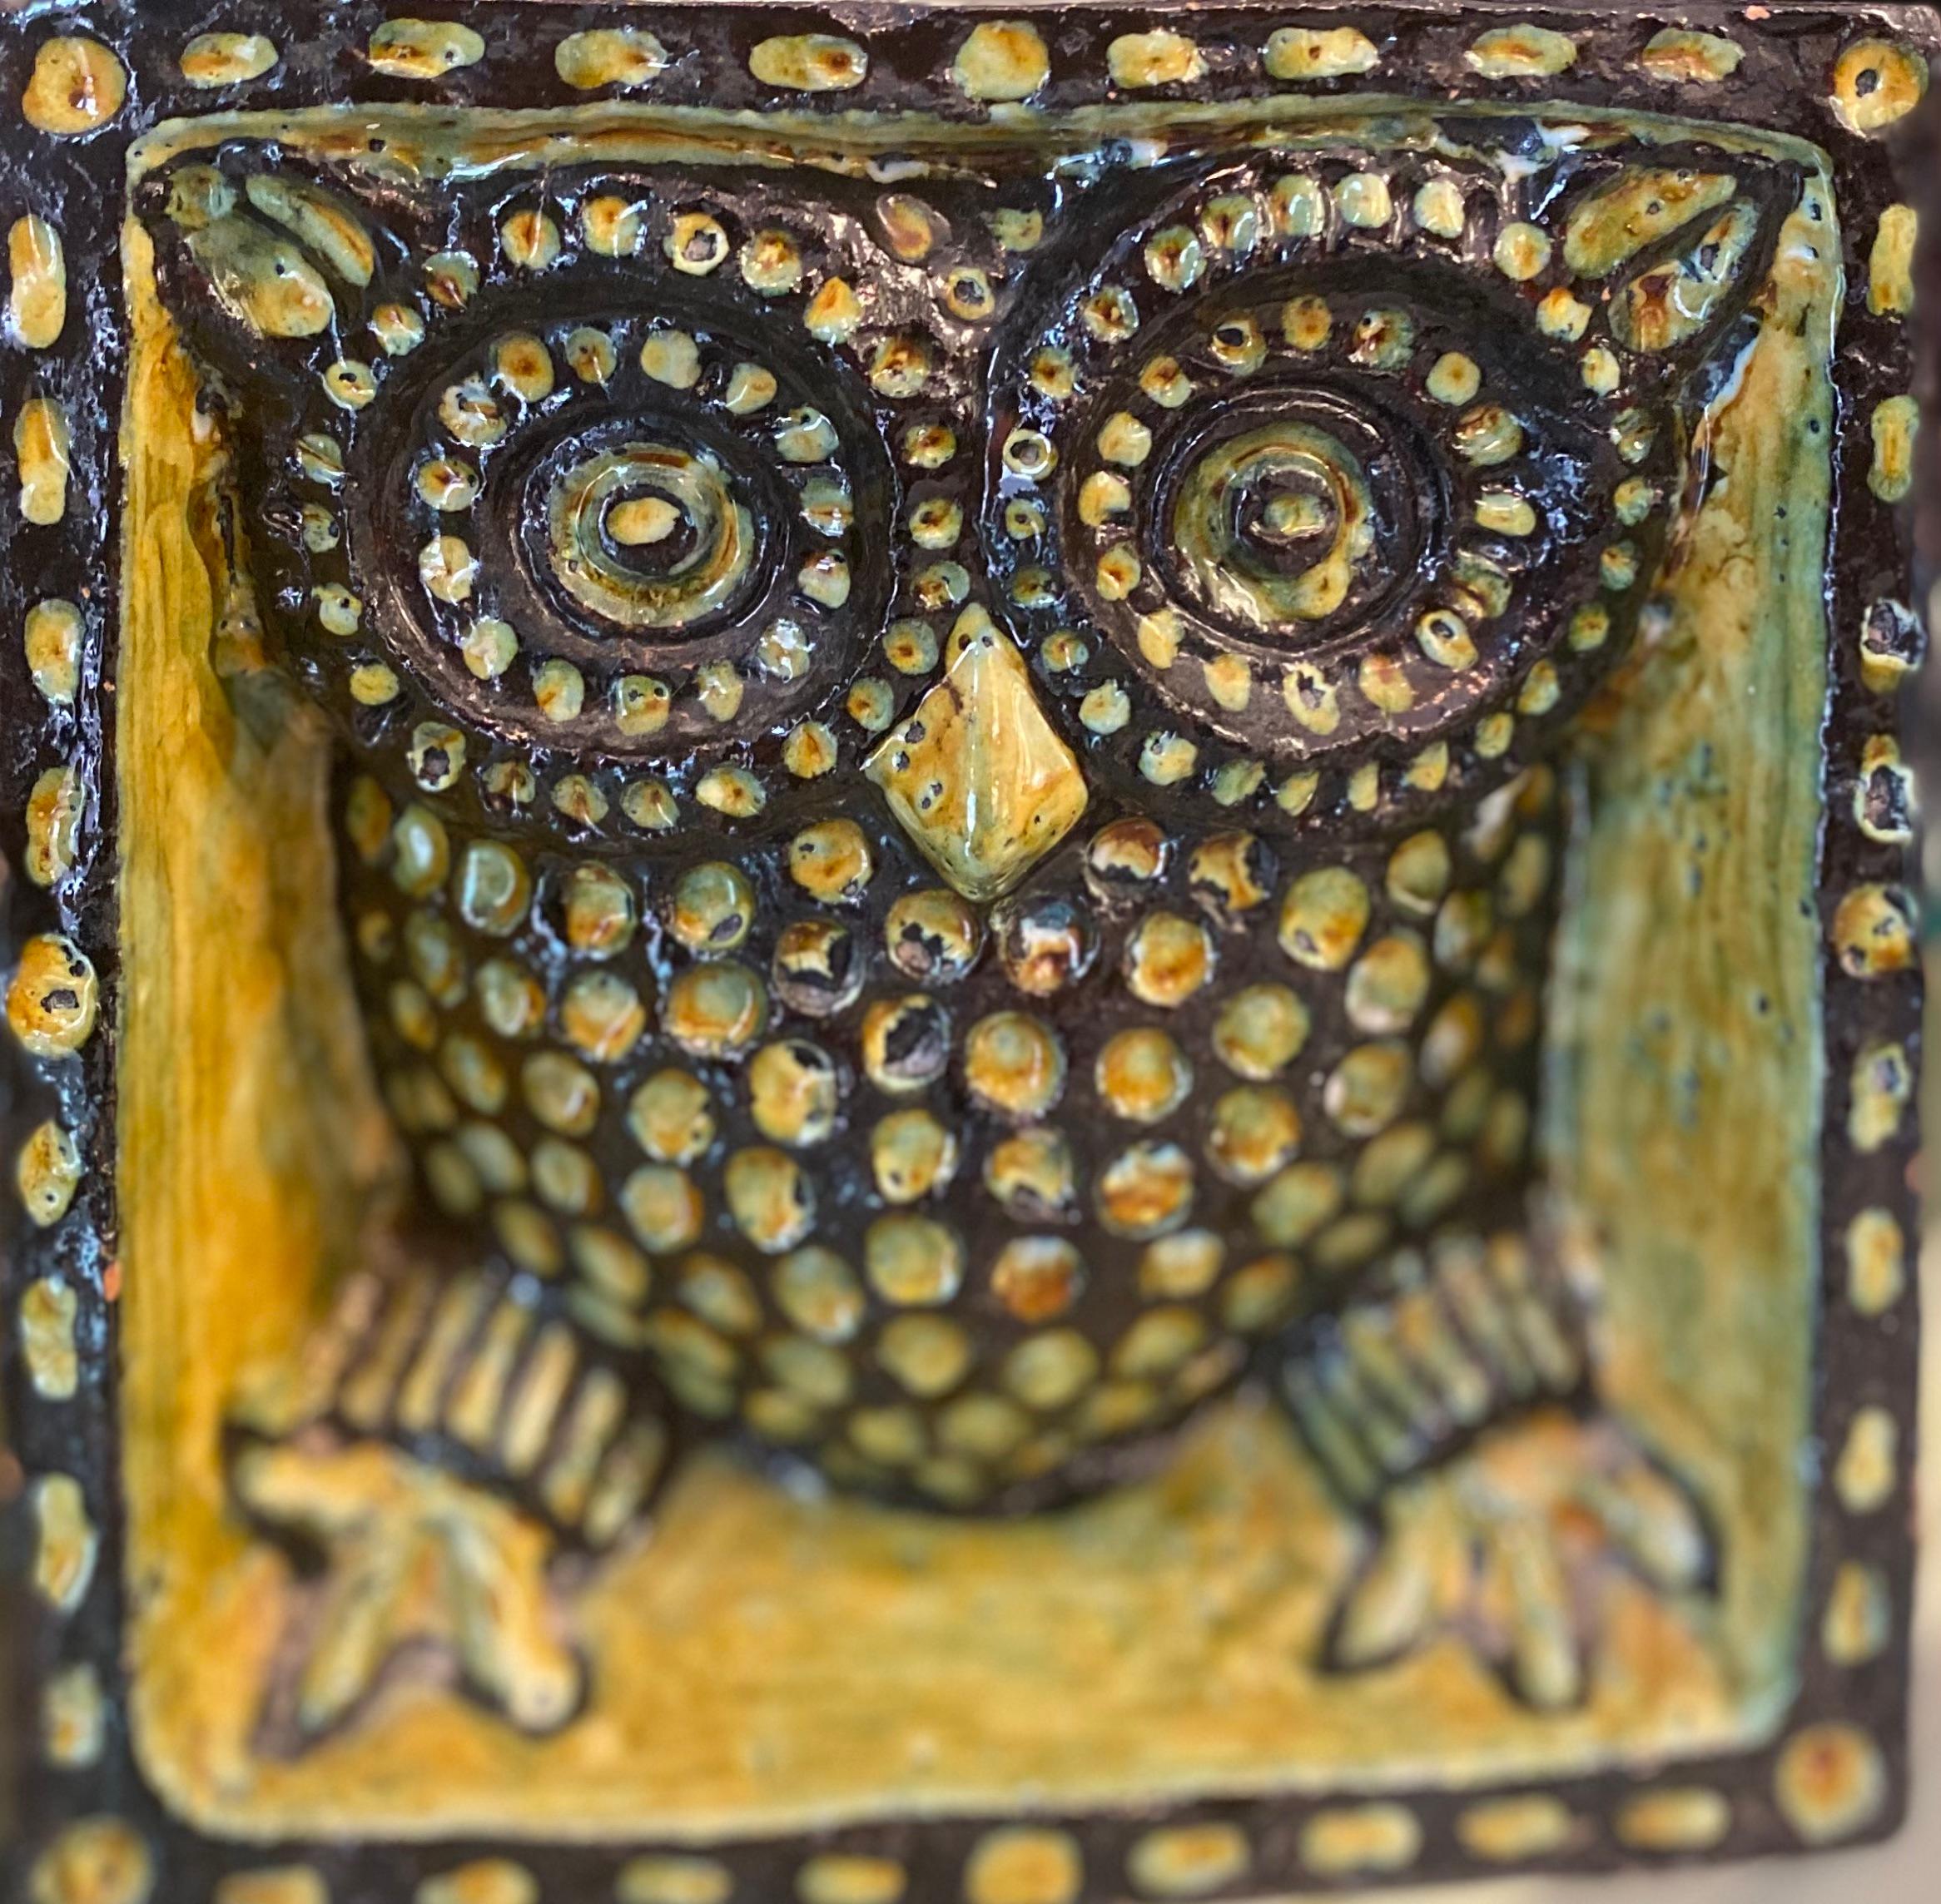 Cubic sculpture Owls
Red clay glazed in yellow and black
W 18 x H 18 x D 7
Signature on the back
circa 1970
Perfect condition

Price : € 750,00.